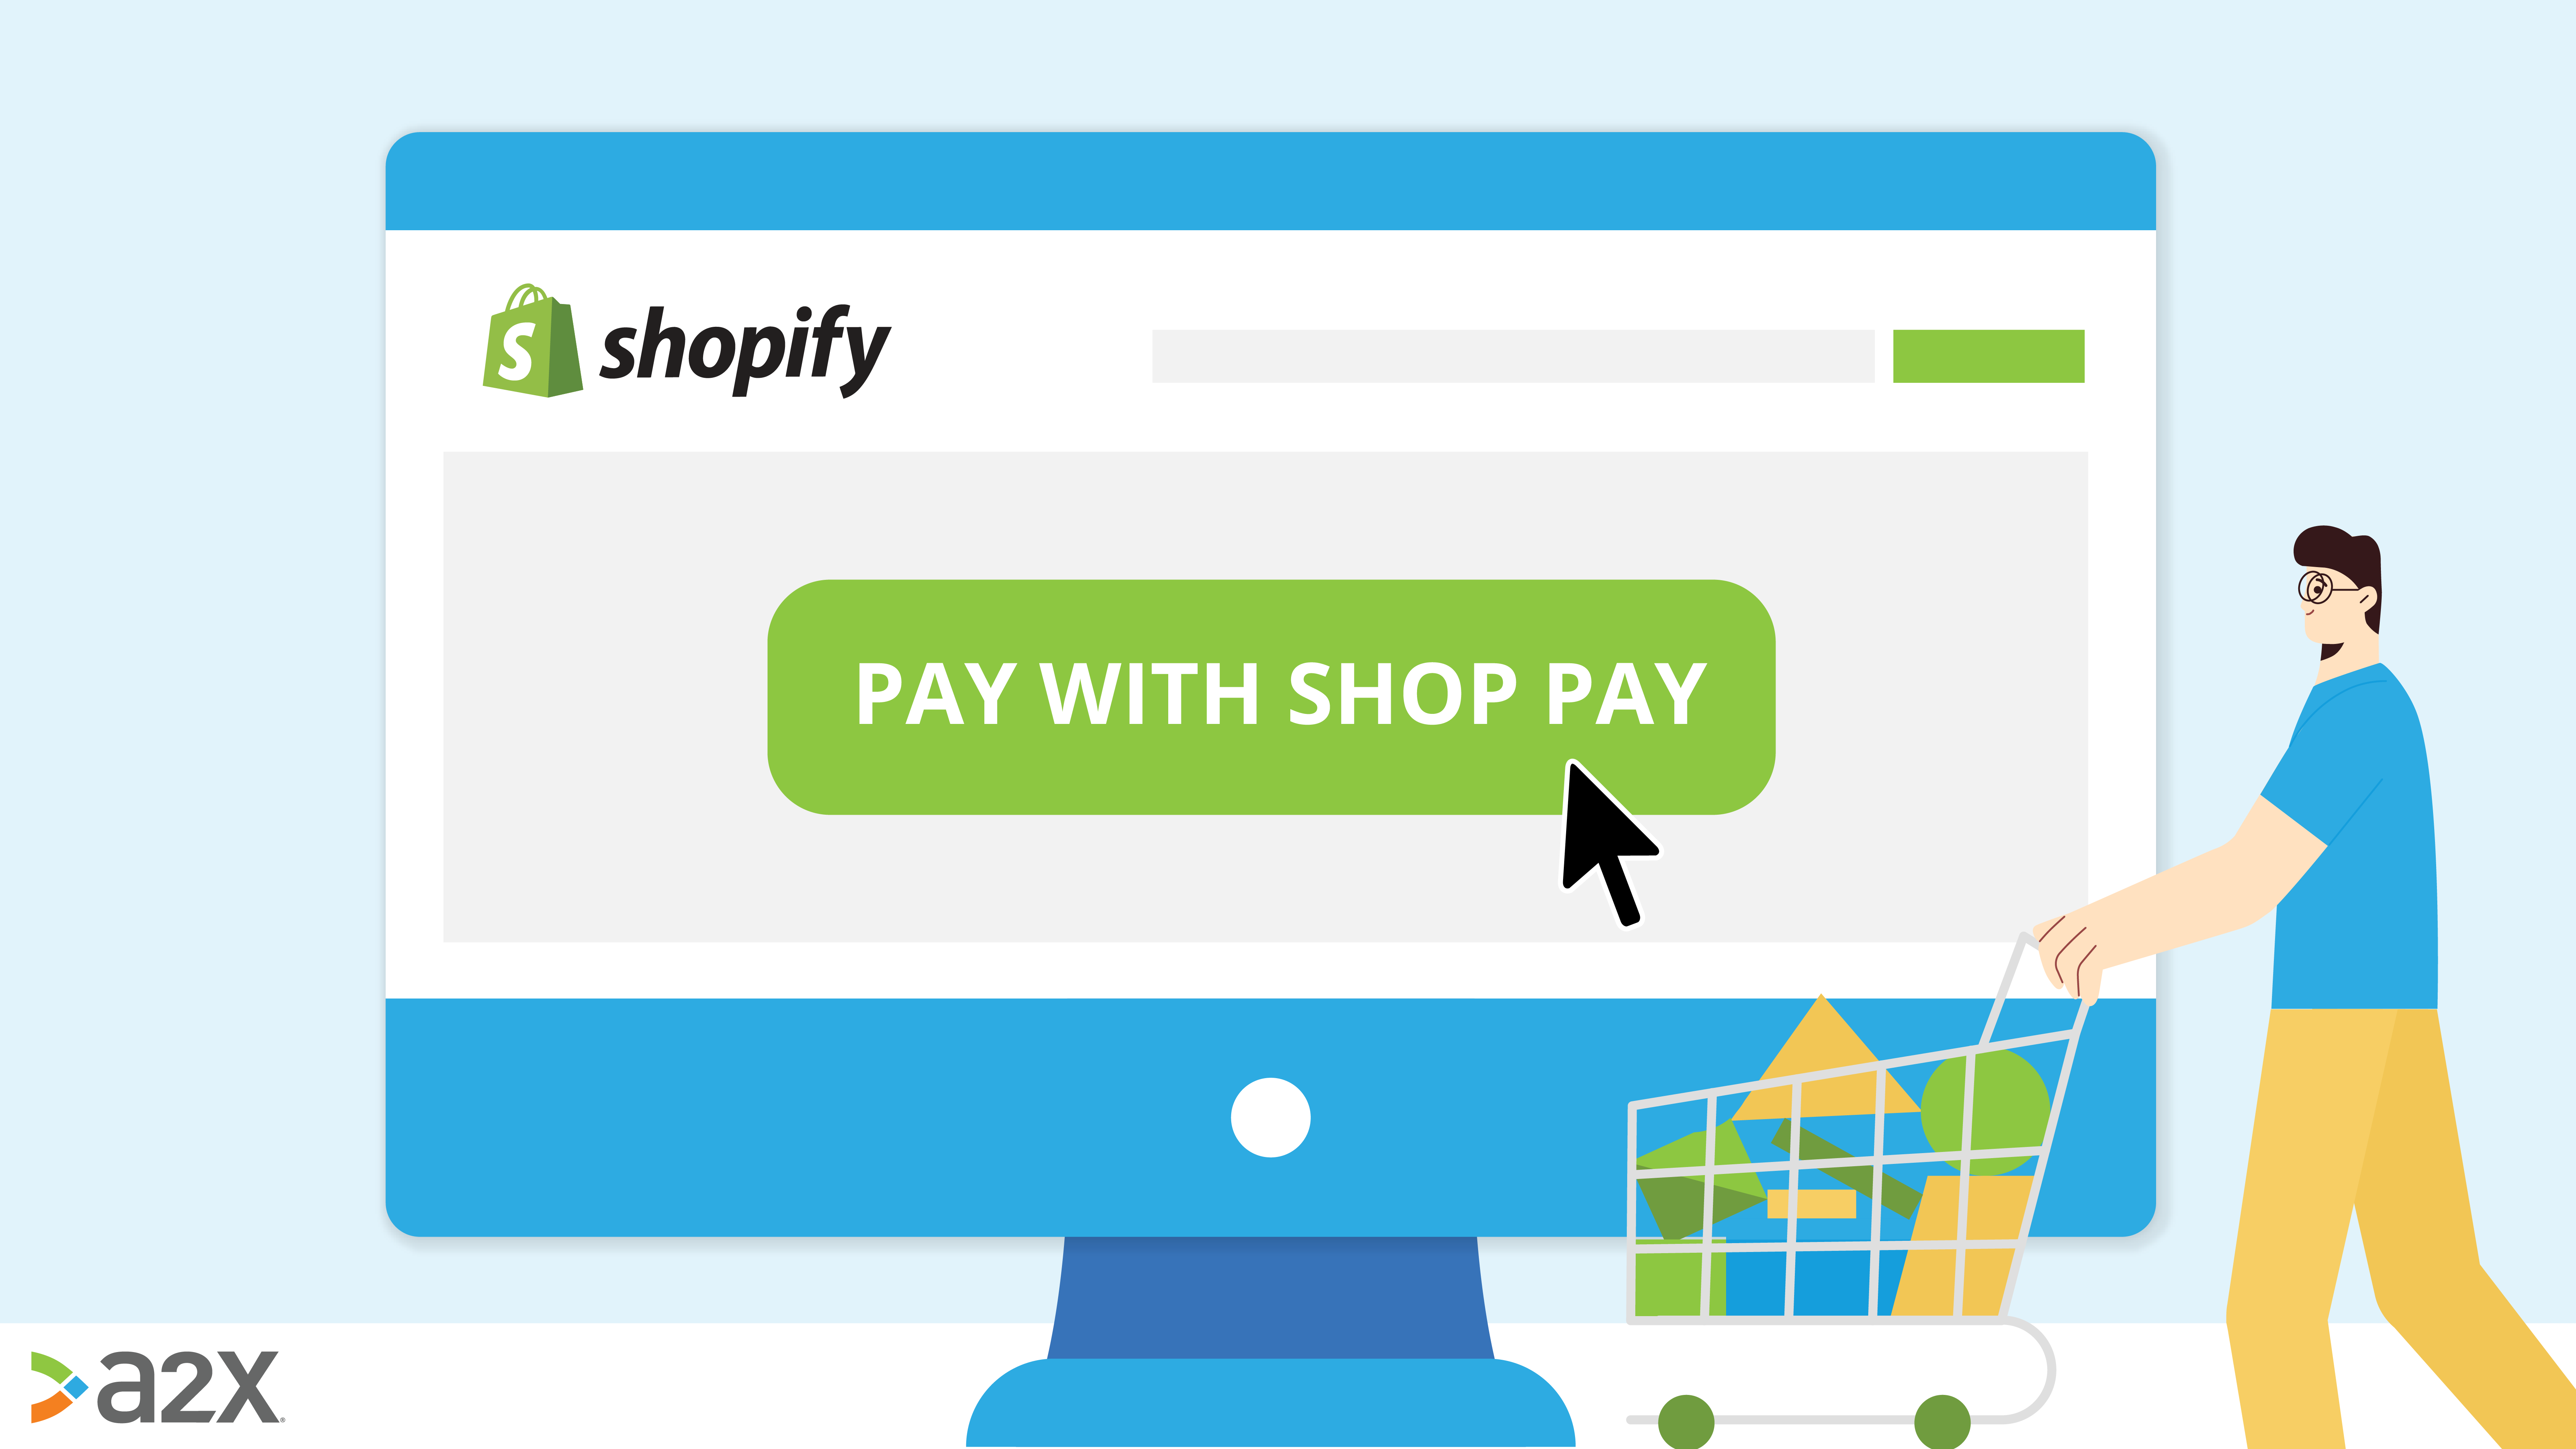 Everything You Need To Know About Shopify Payments [Guide]